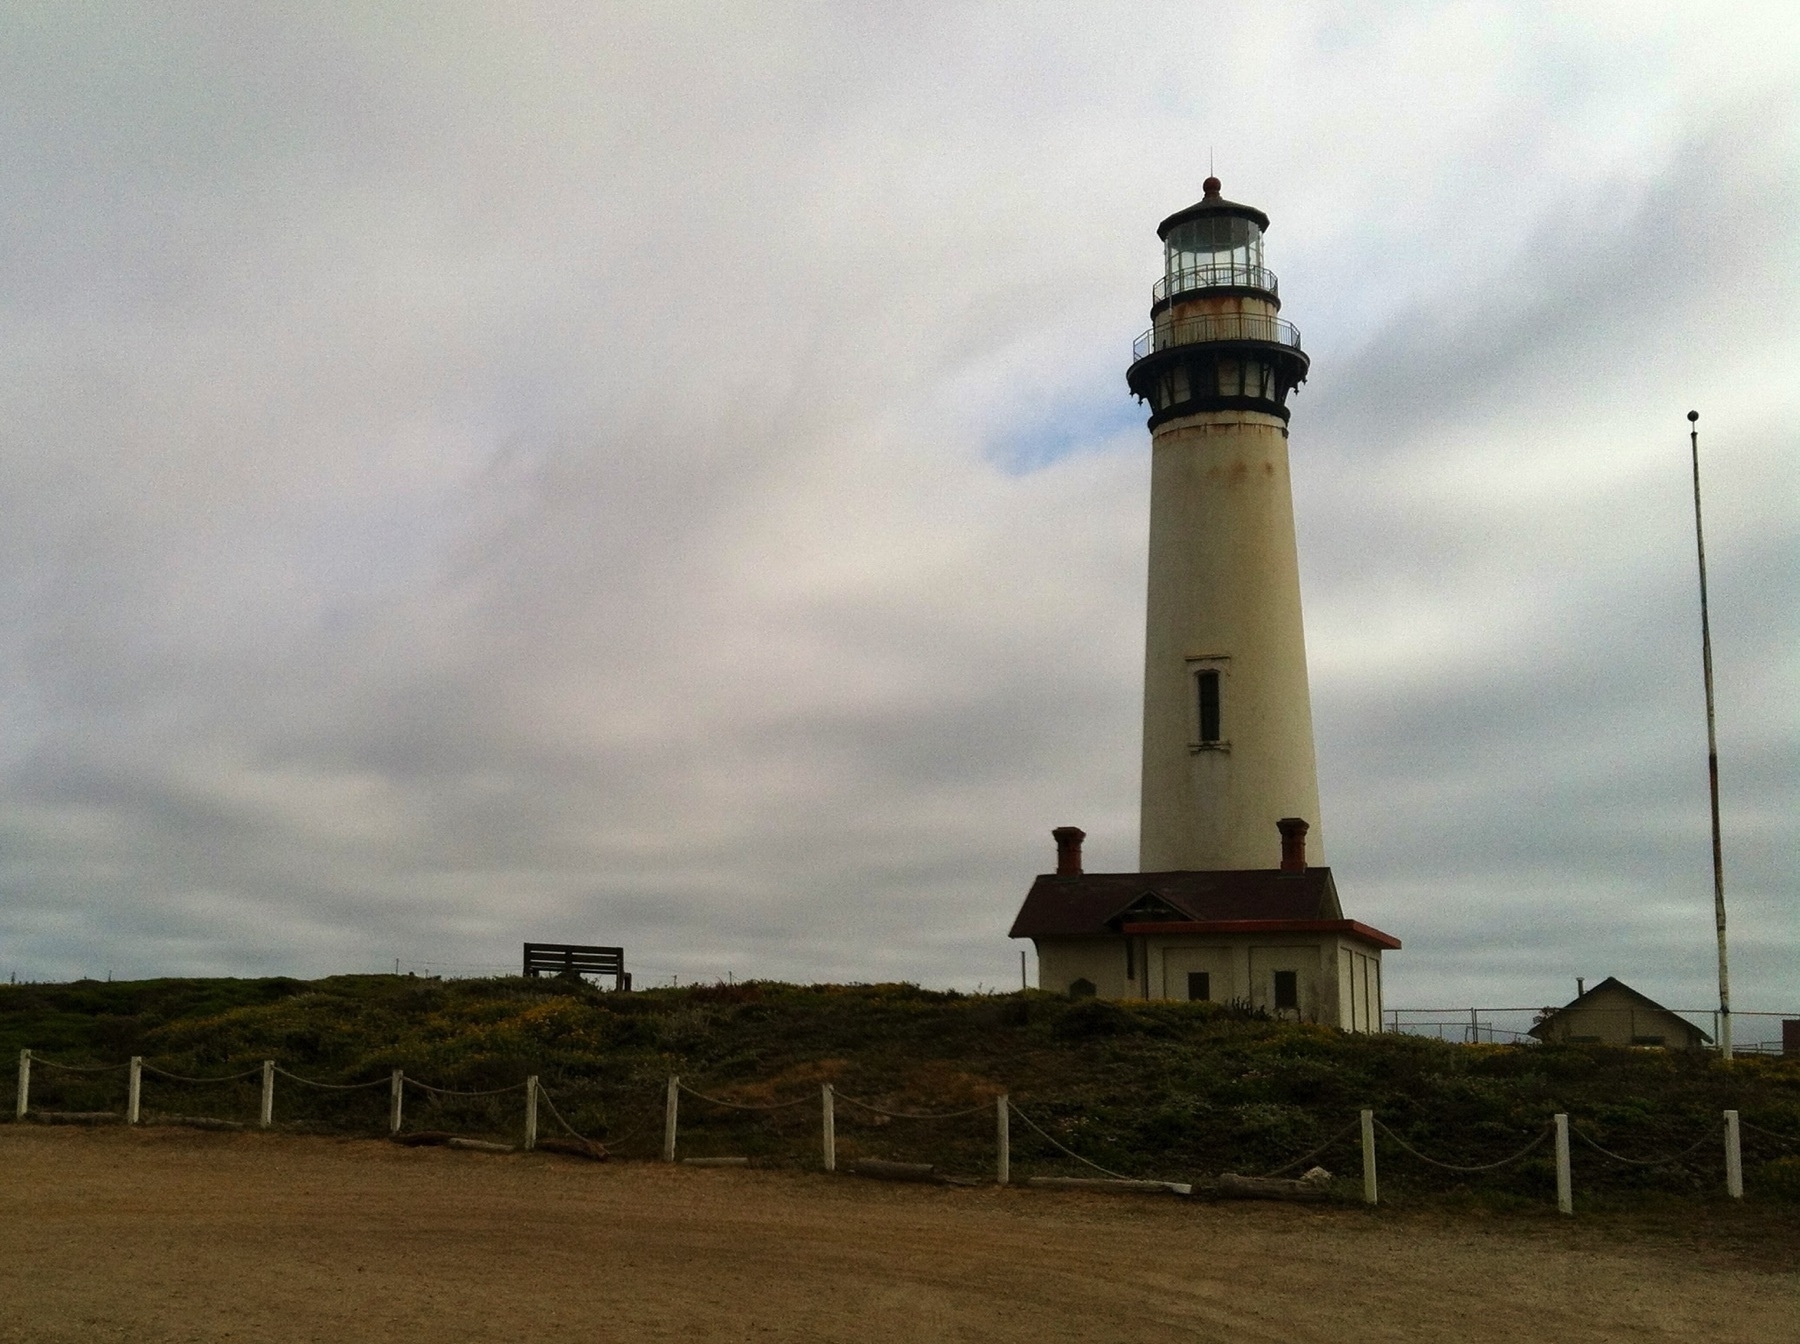 A traditional white lighthouse, faded and spotted with rust, atop a house with a gabled roof and two chimneys. An empty bench looks out onto the ocean, while an empty sand parking lot and overcast sky complete the gloomy picture.